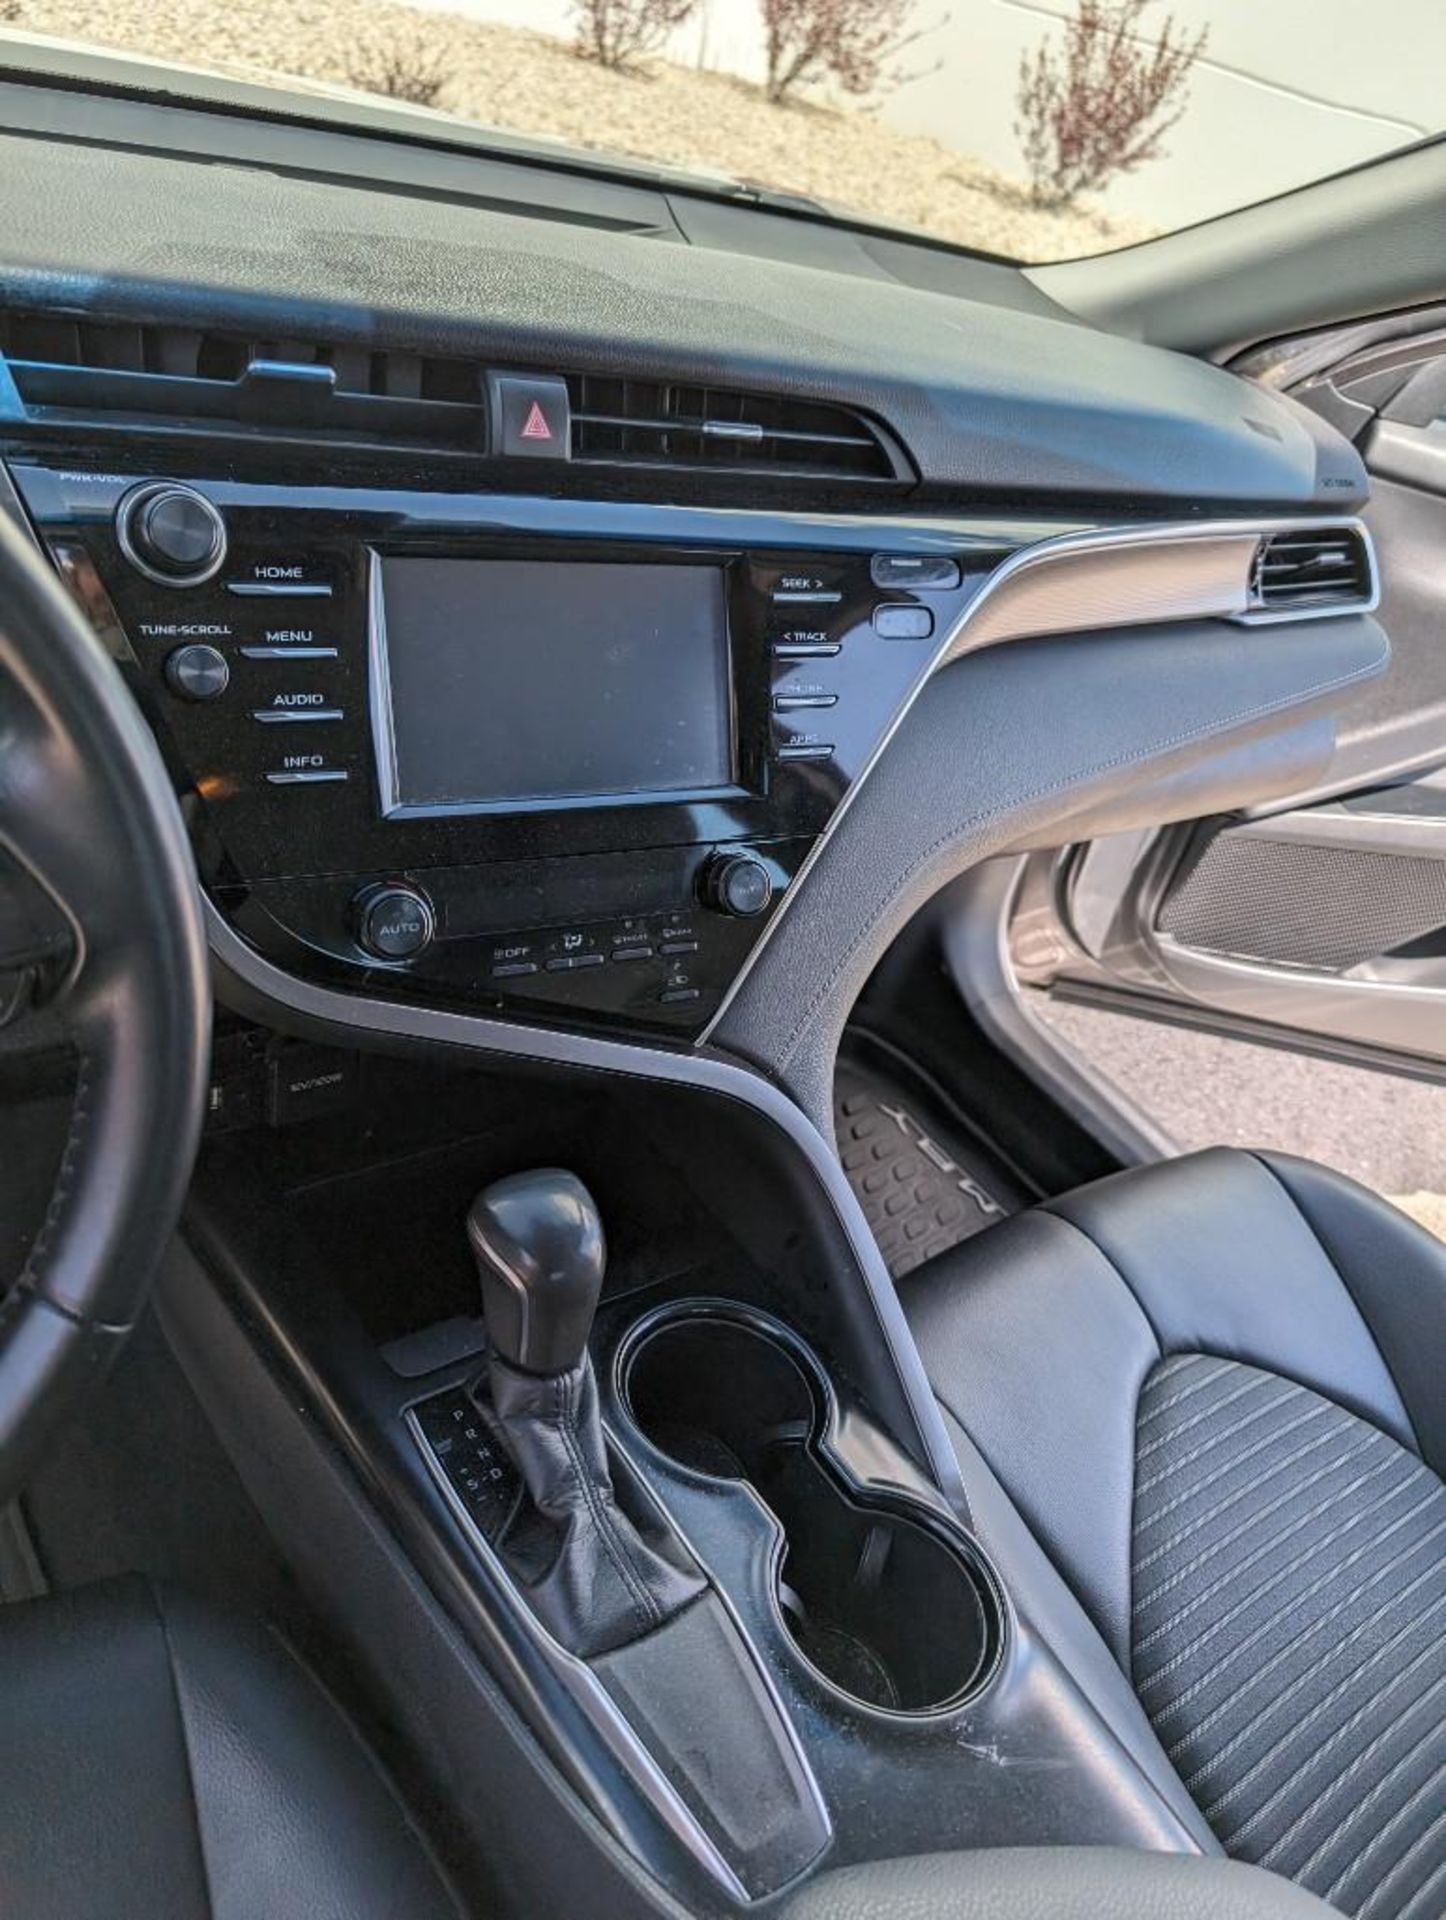 2018 Toyota Camry SE w/ 101,344 Miles, FWD 4 cylinder VIN #: 4T1B11HK2JU024047 Features and Notes: r - Bild 10 aus 16